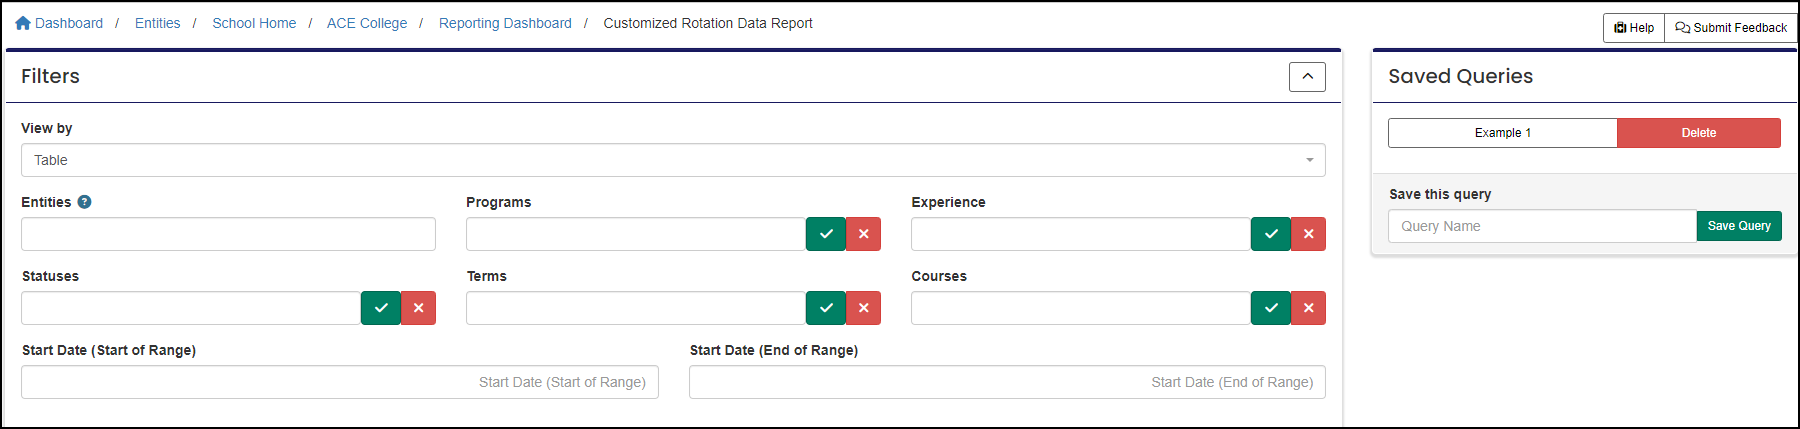 Image shows available filters for customized rotation data report.